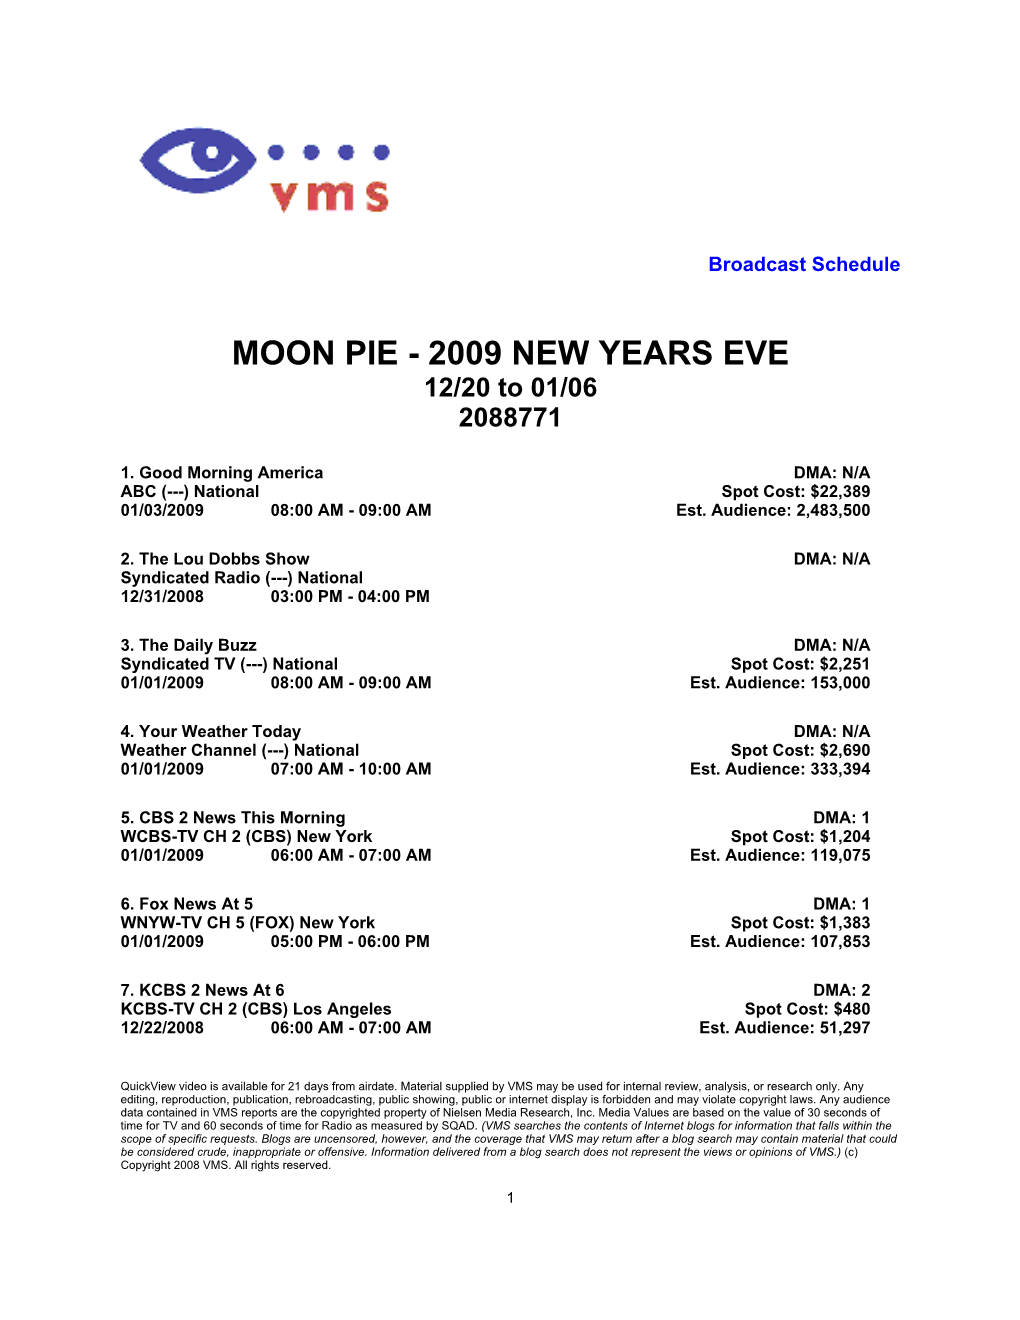 MOON PIE - 2009 NEW YEARS EVE 12/20 to 01/06 2088771